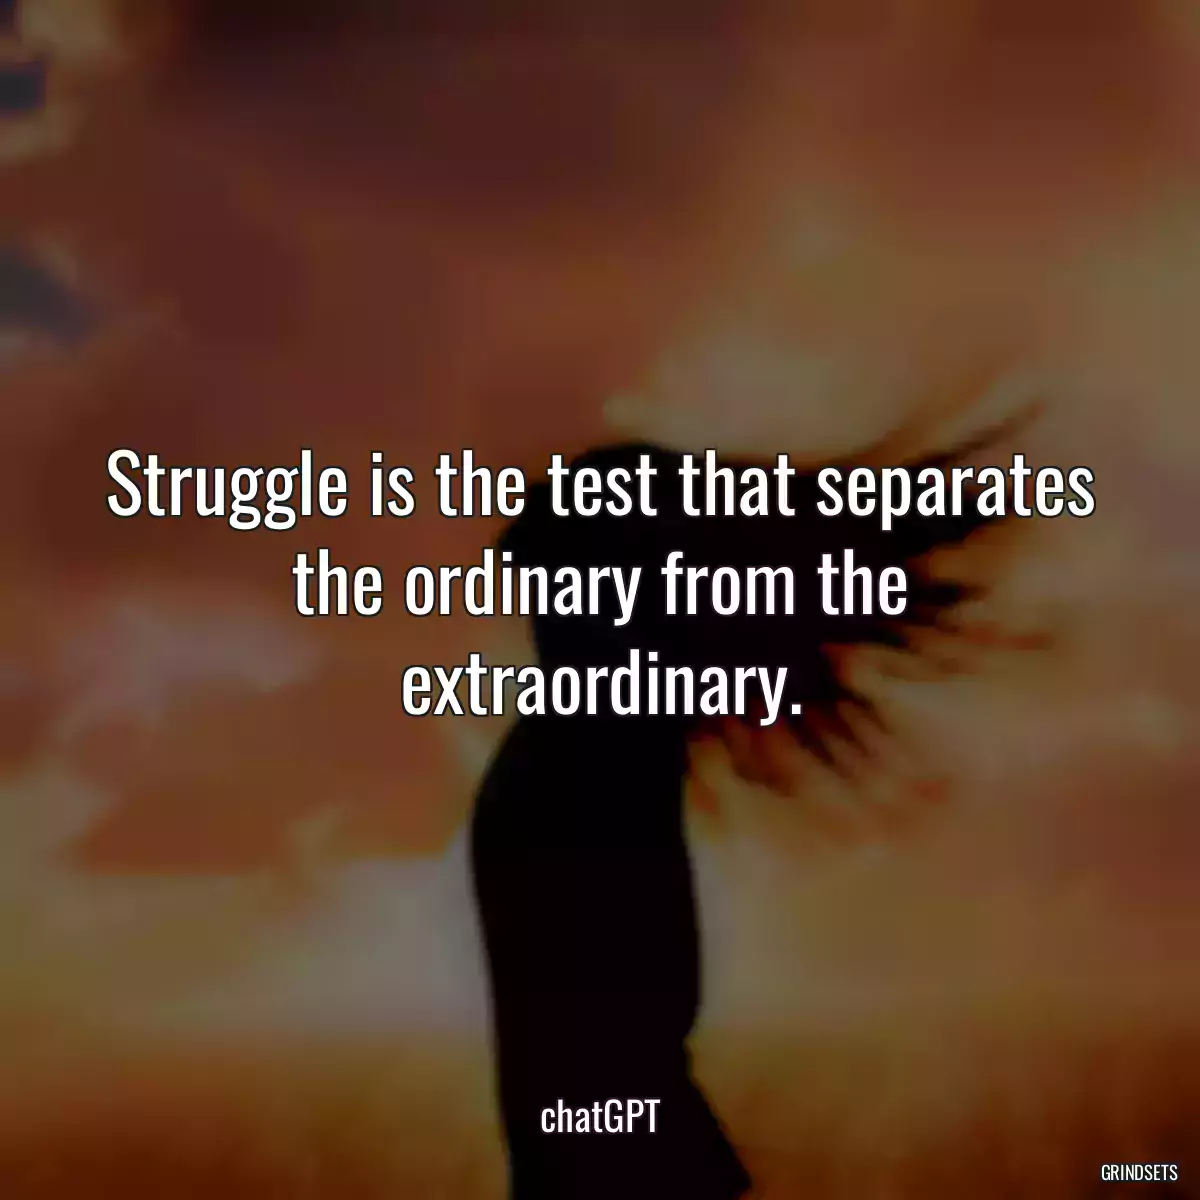 Struggle is the test that separates the ordinary from the extraordinary.